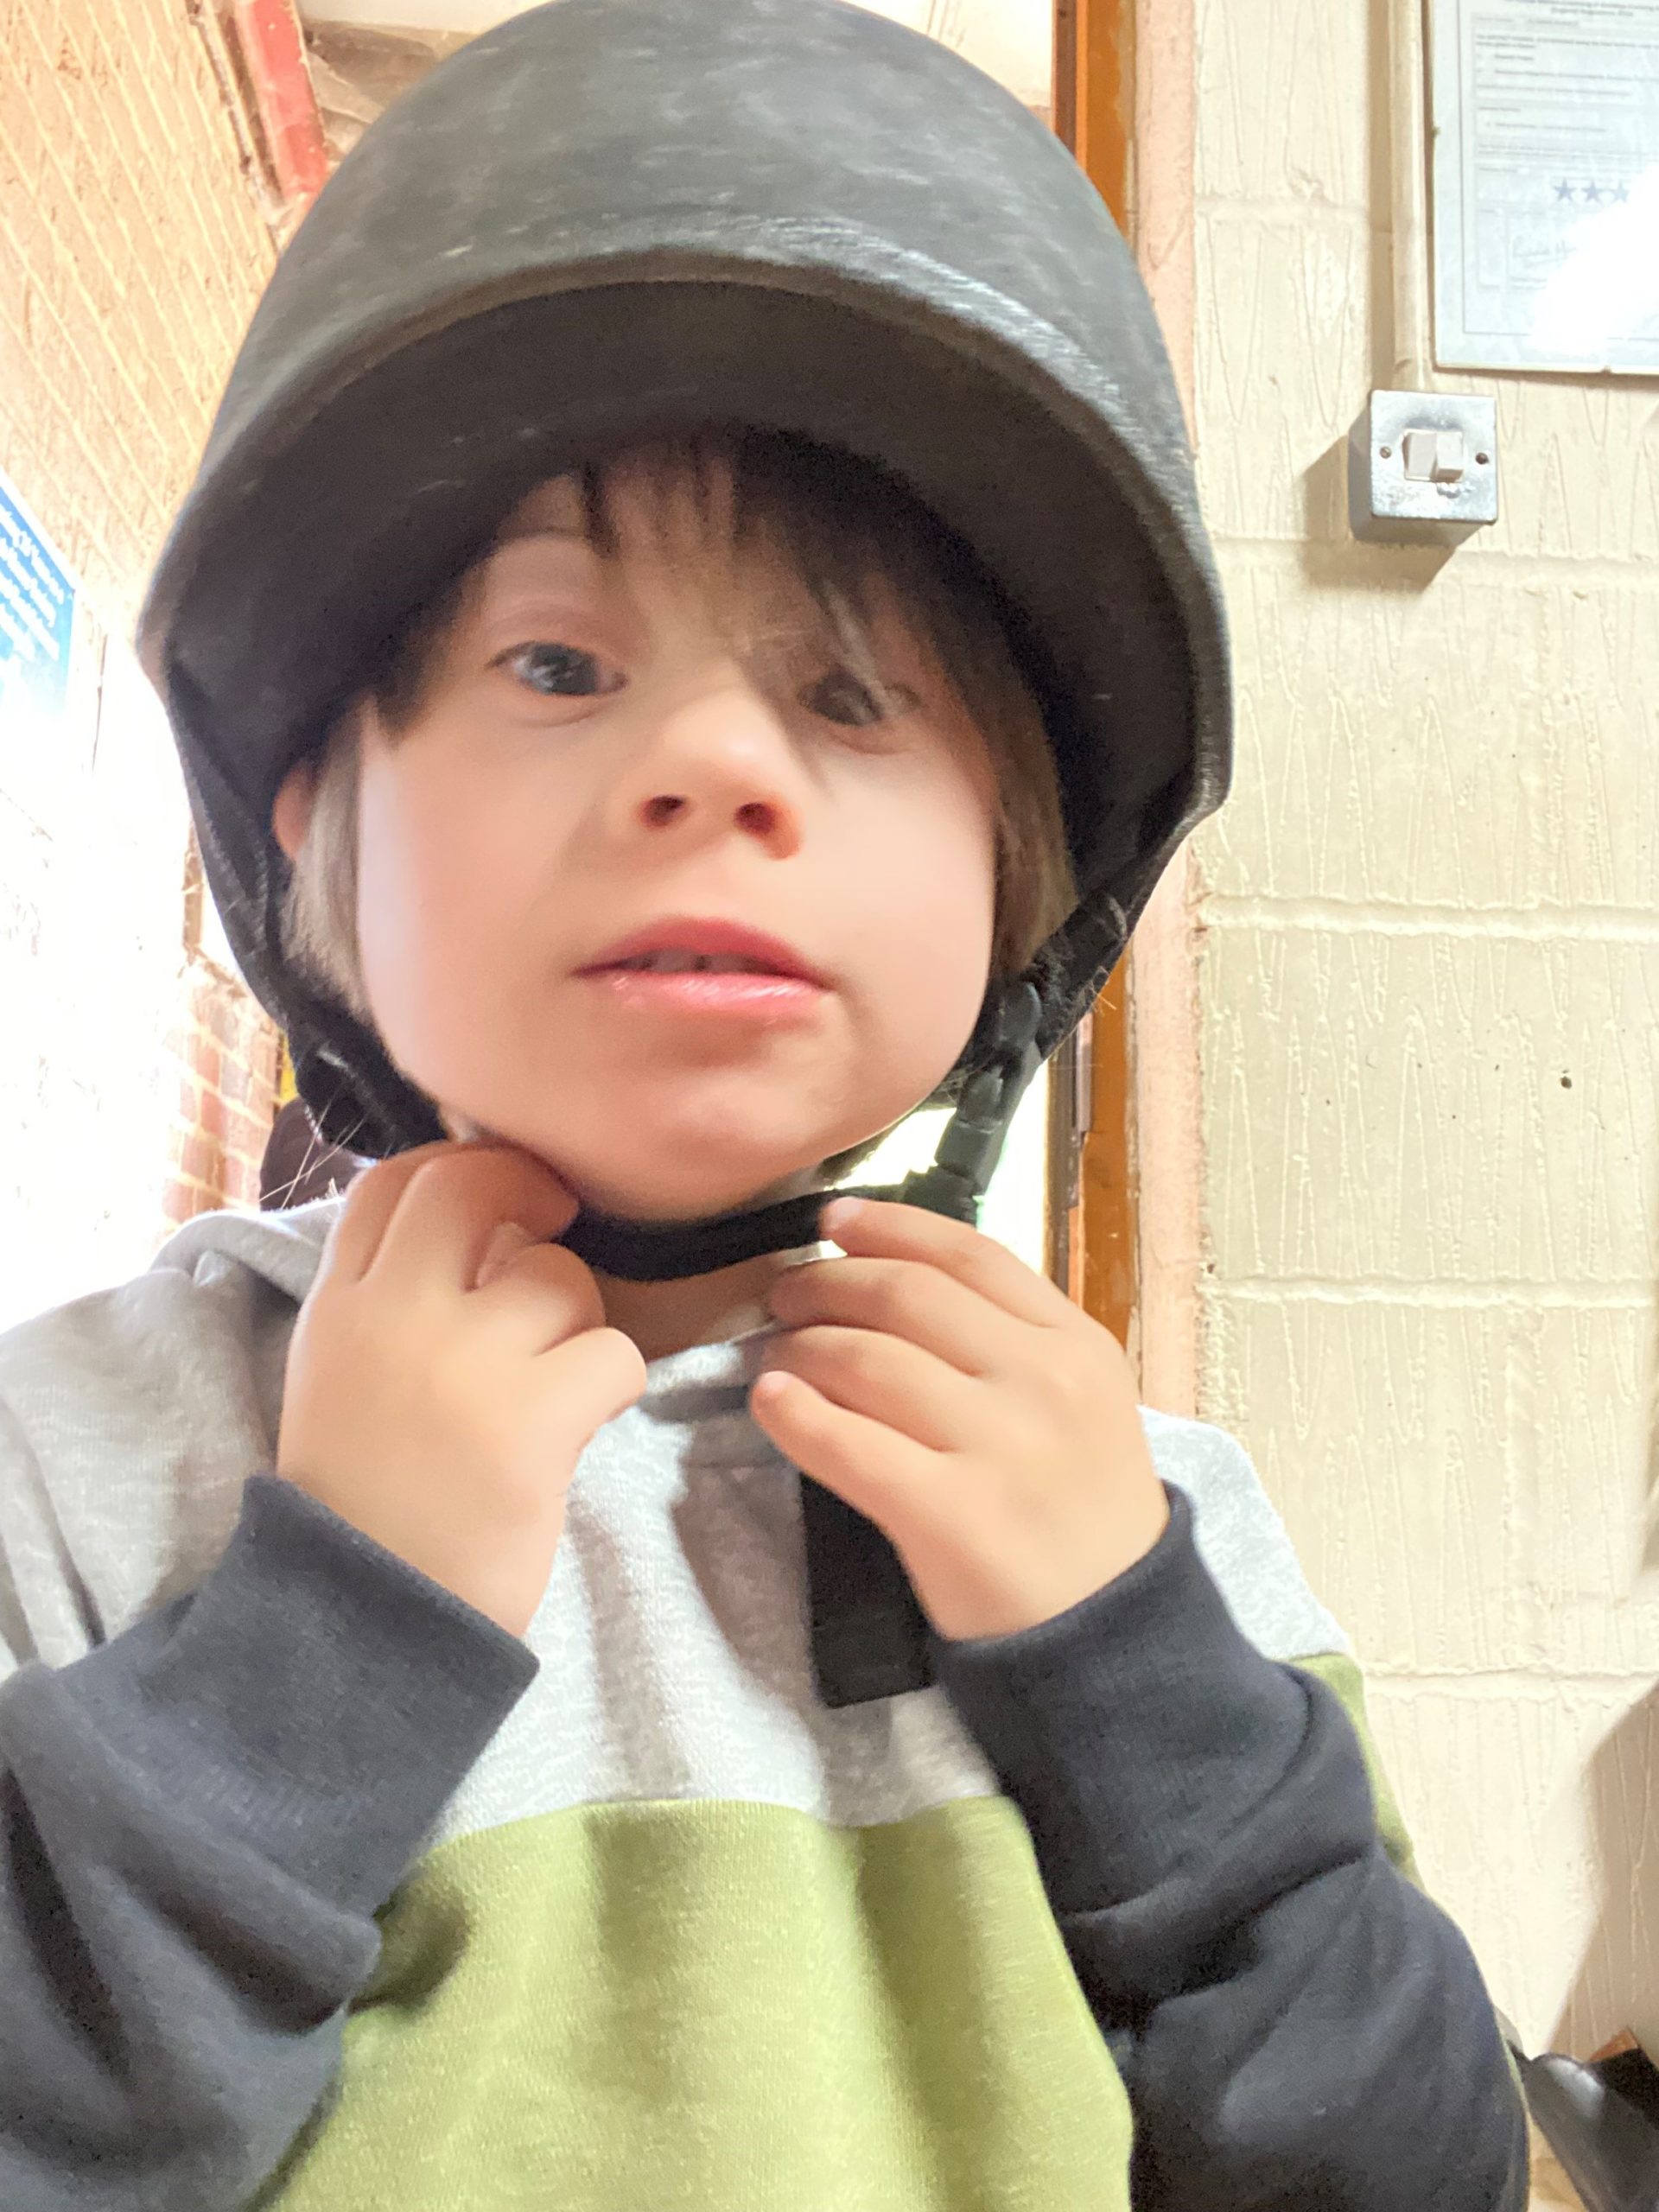 A young boy who has Down's syndrome wearing a riding hat